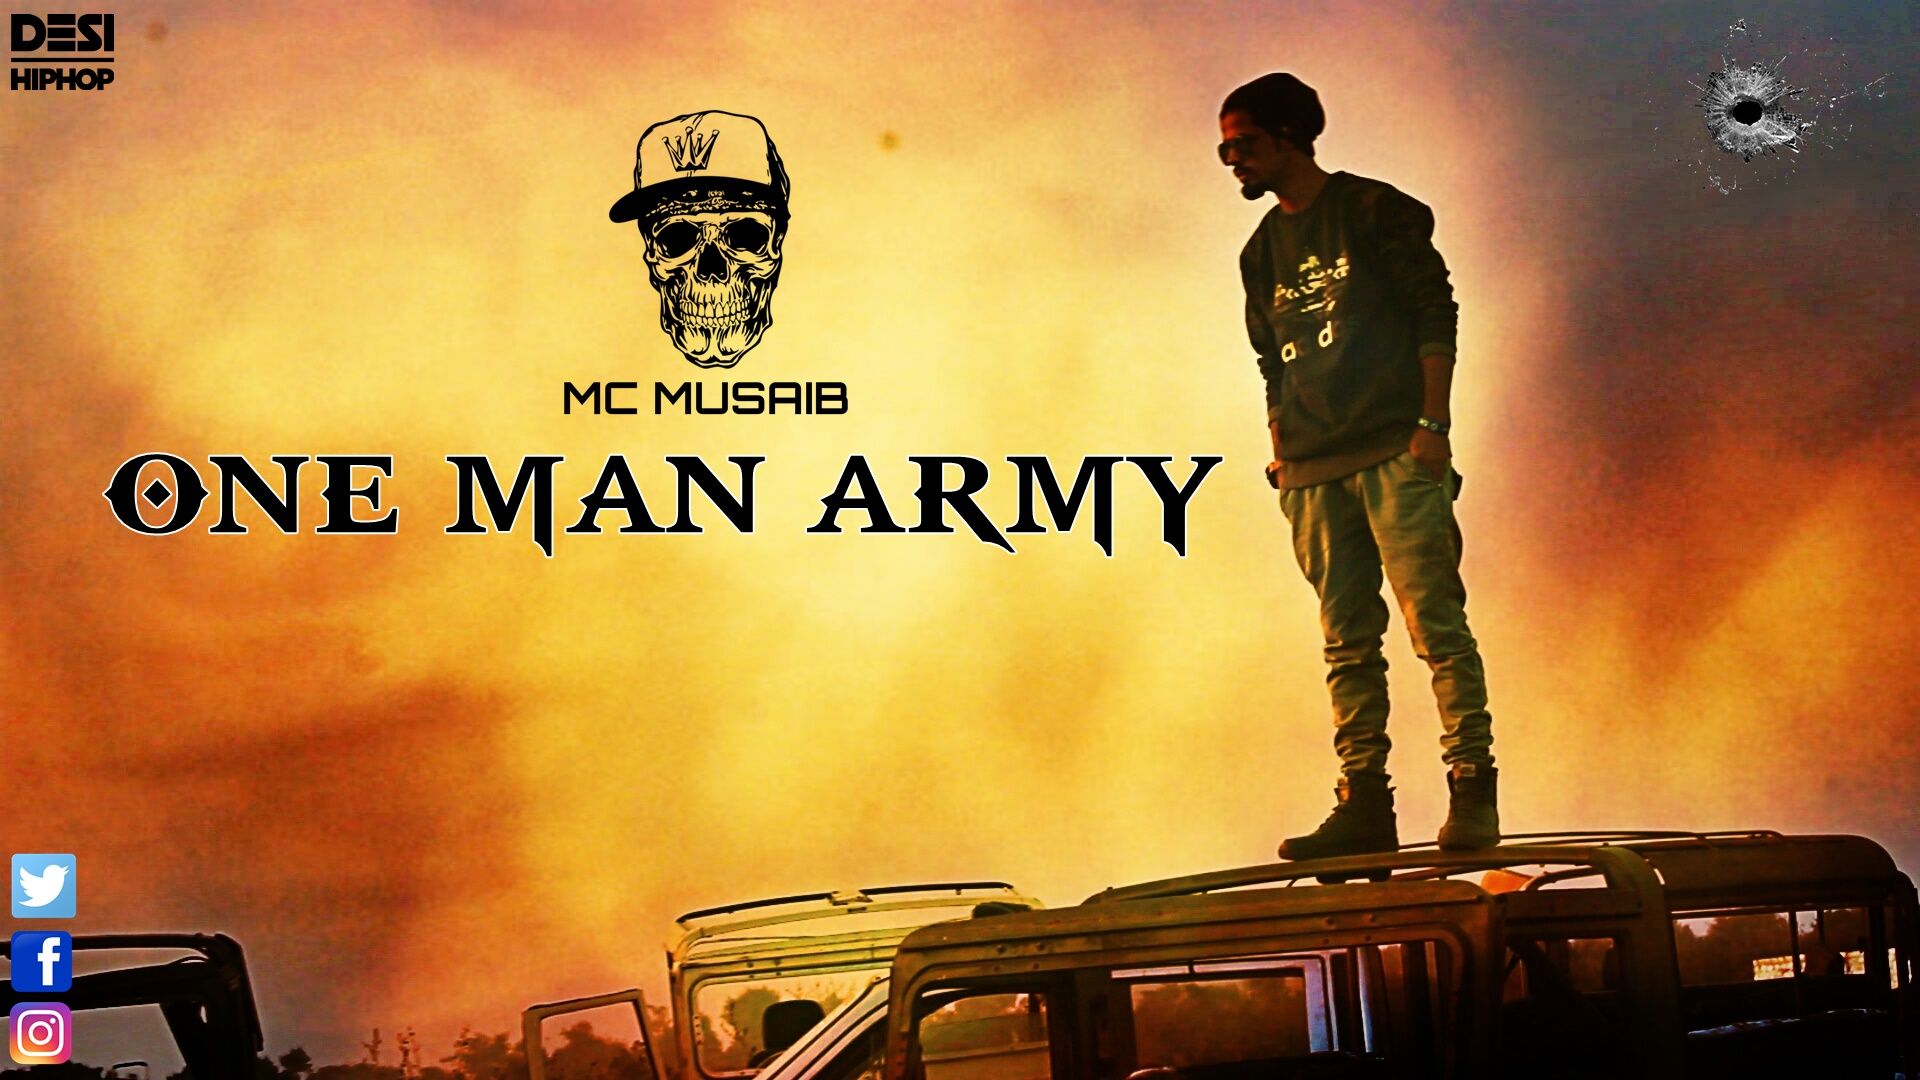 One Man Army Official Music Video